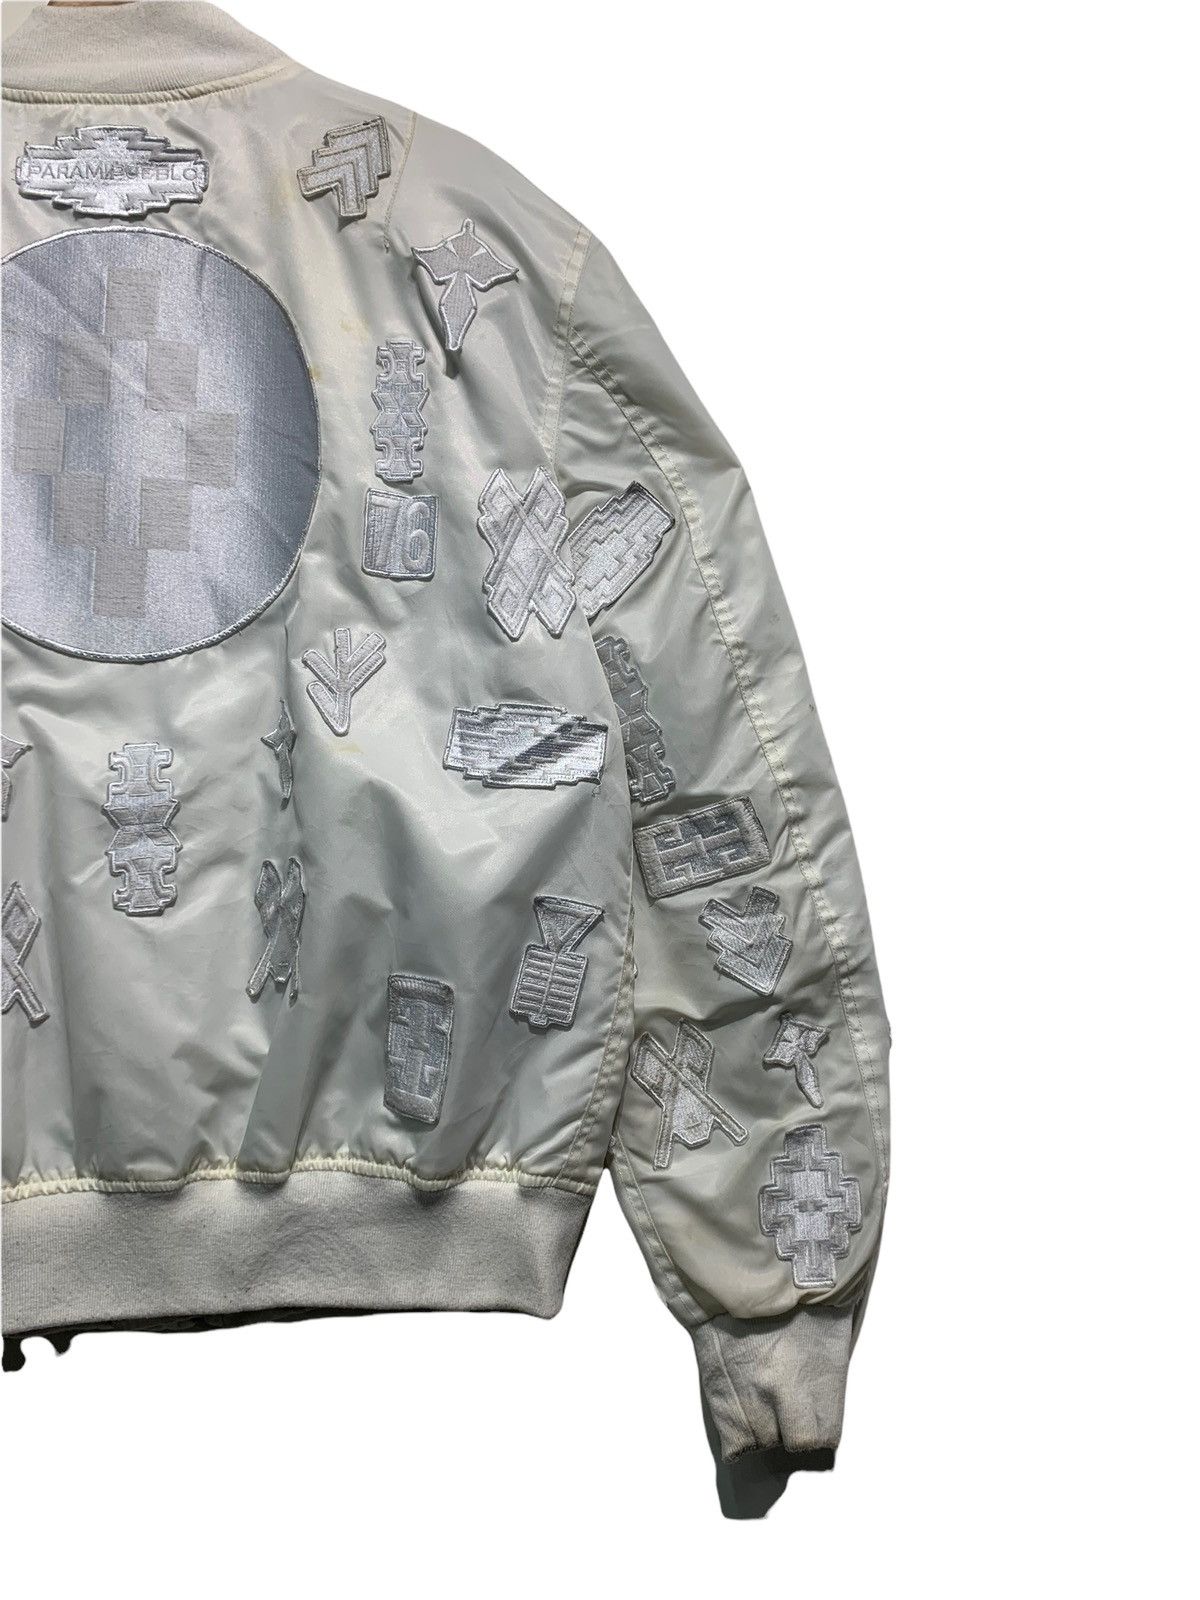 🔥MARCELO BURLON X ALPHA IND WHITE PATCHES EMBROIDERY JACKETS - 11